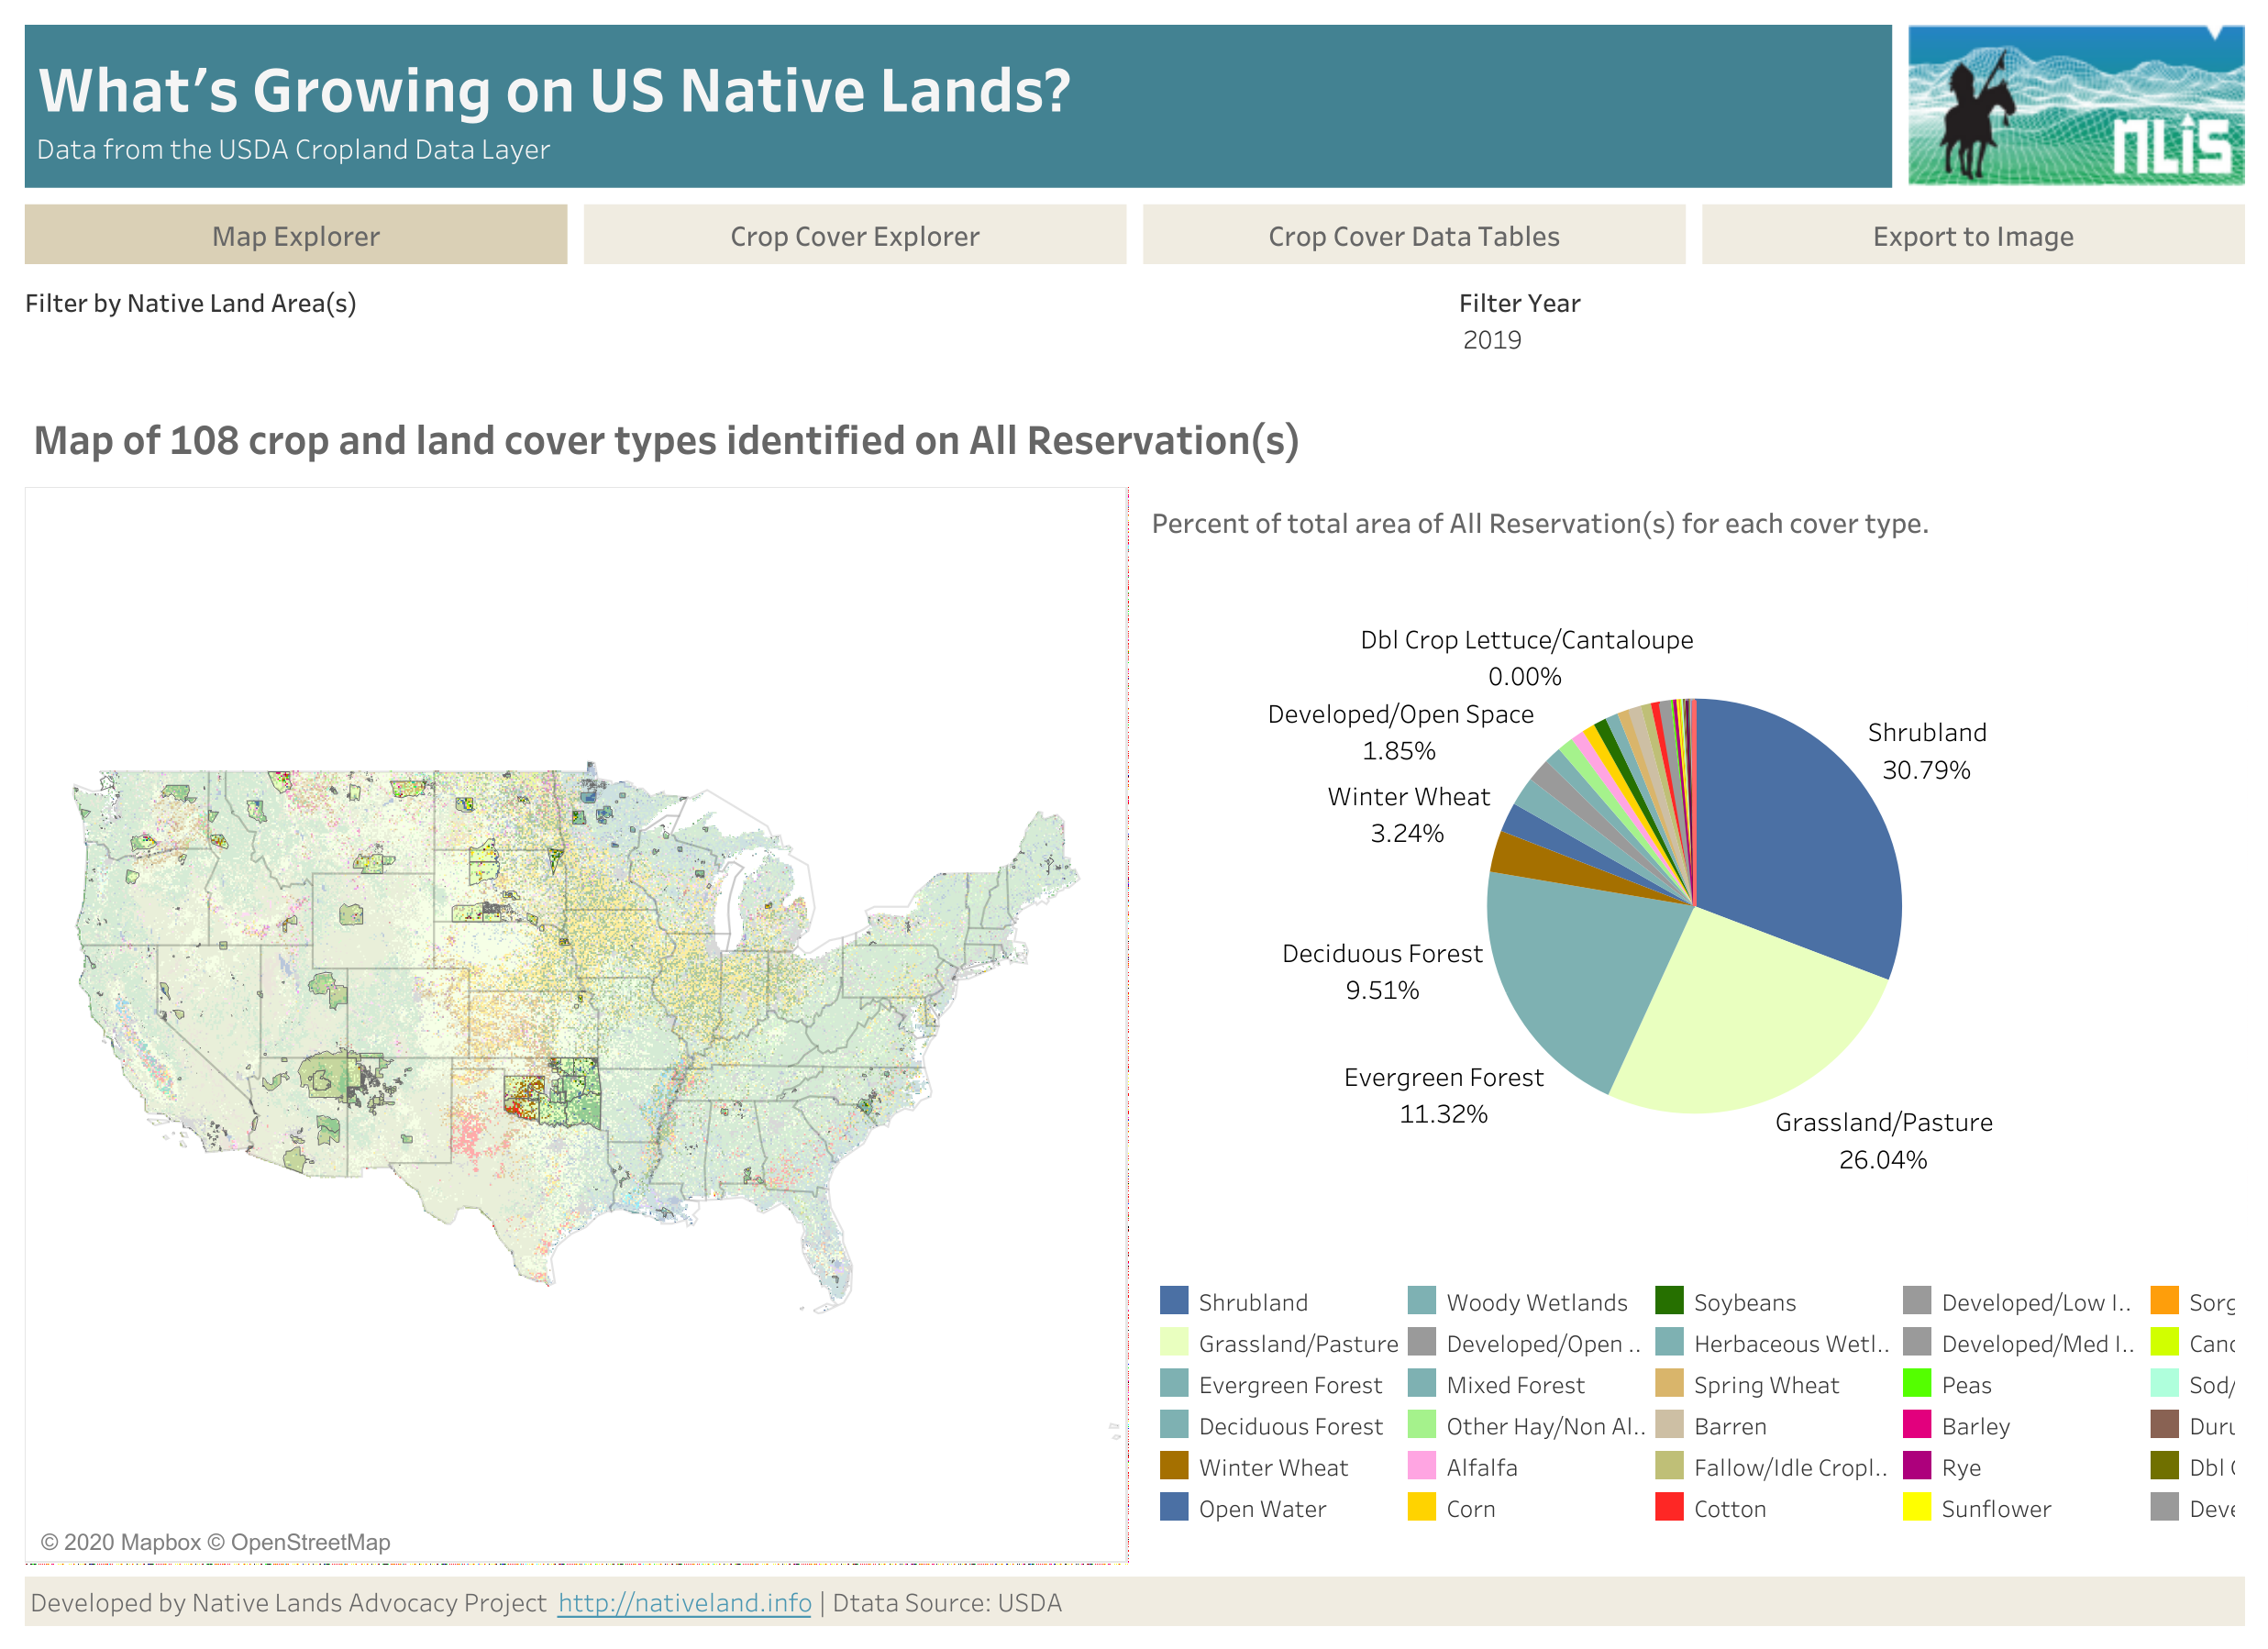 What's Growing on Native Lands in the Coterminous United States